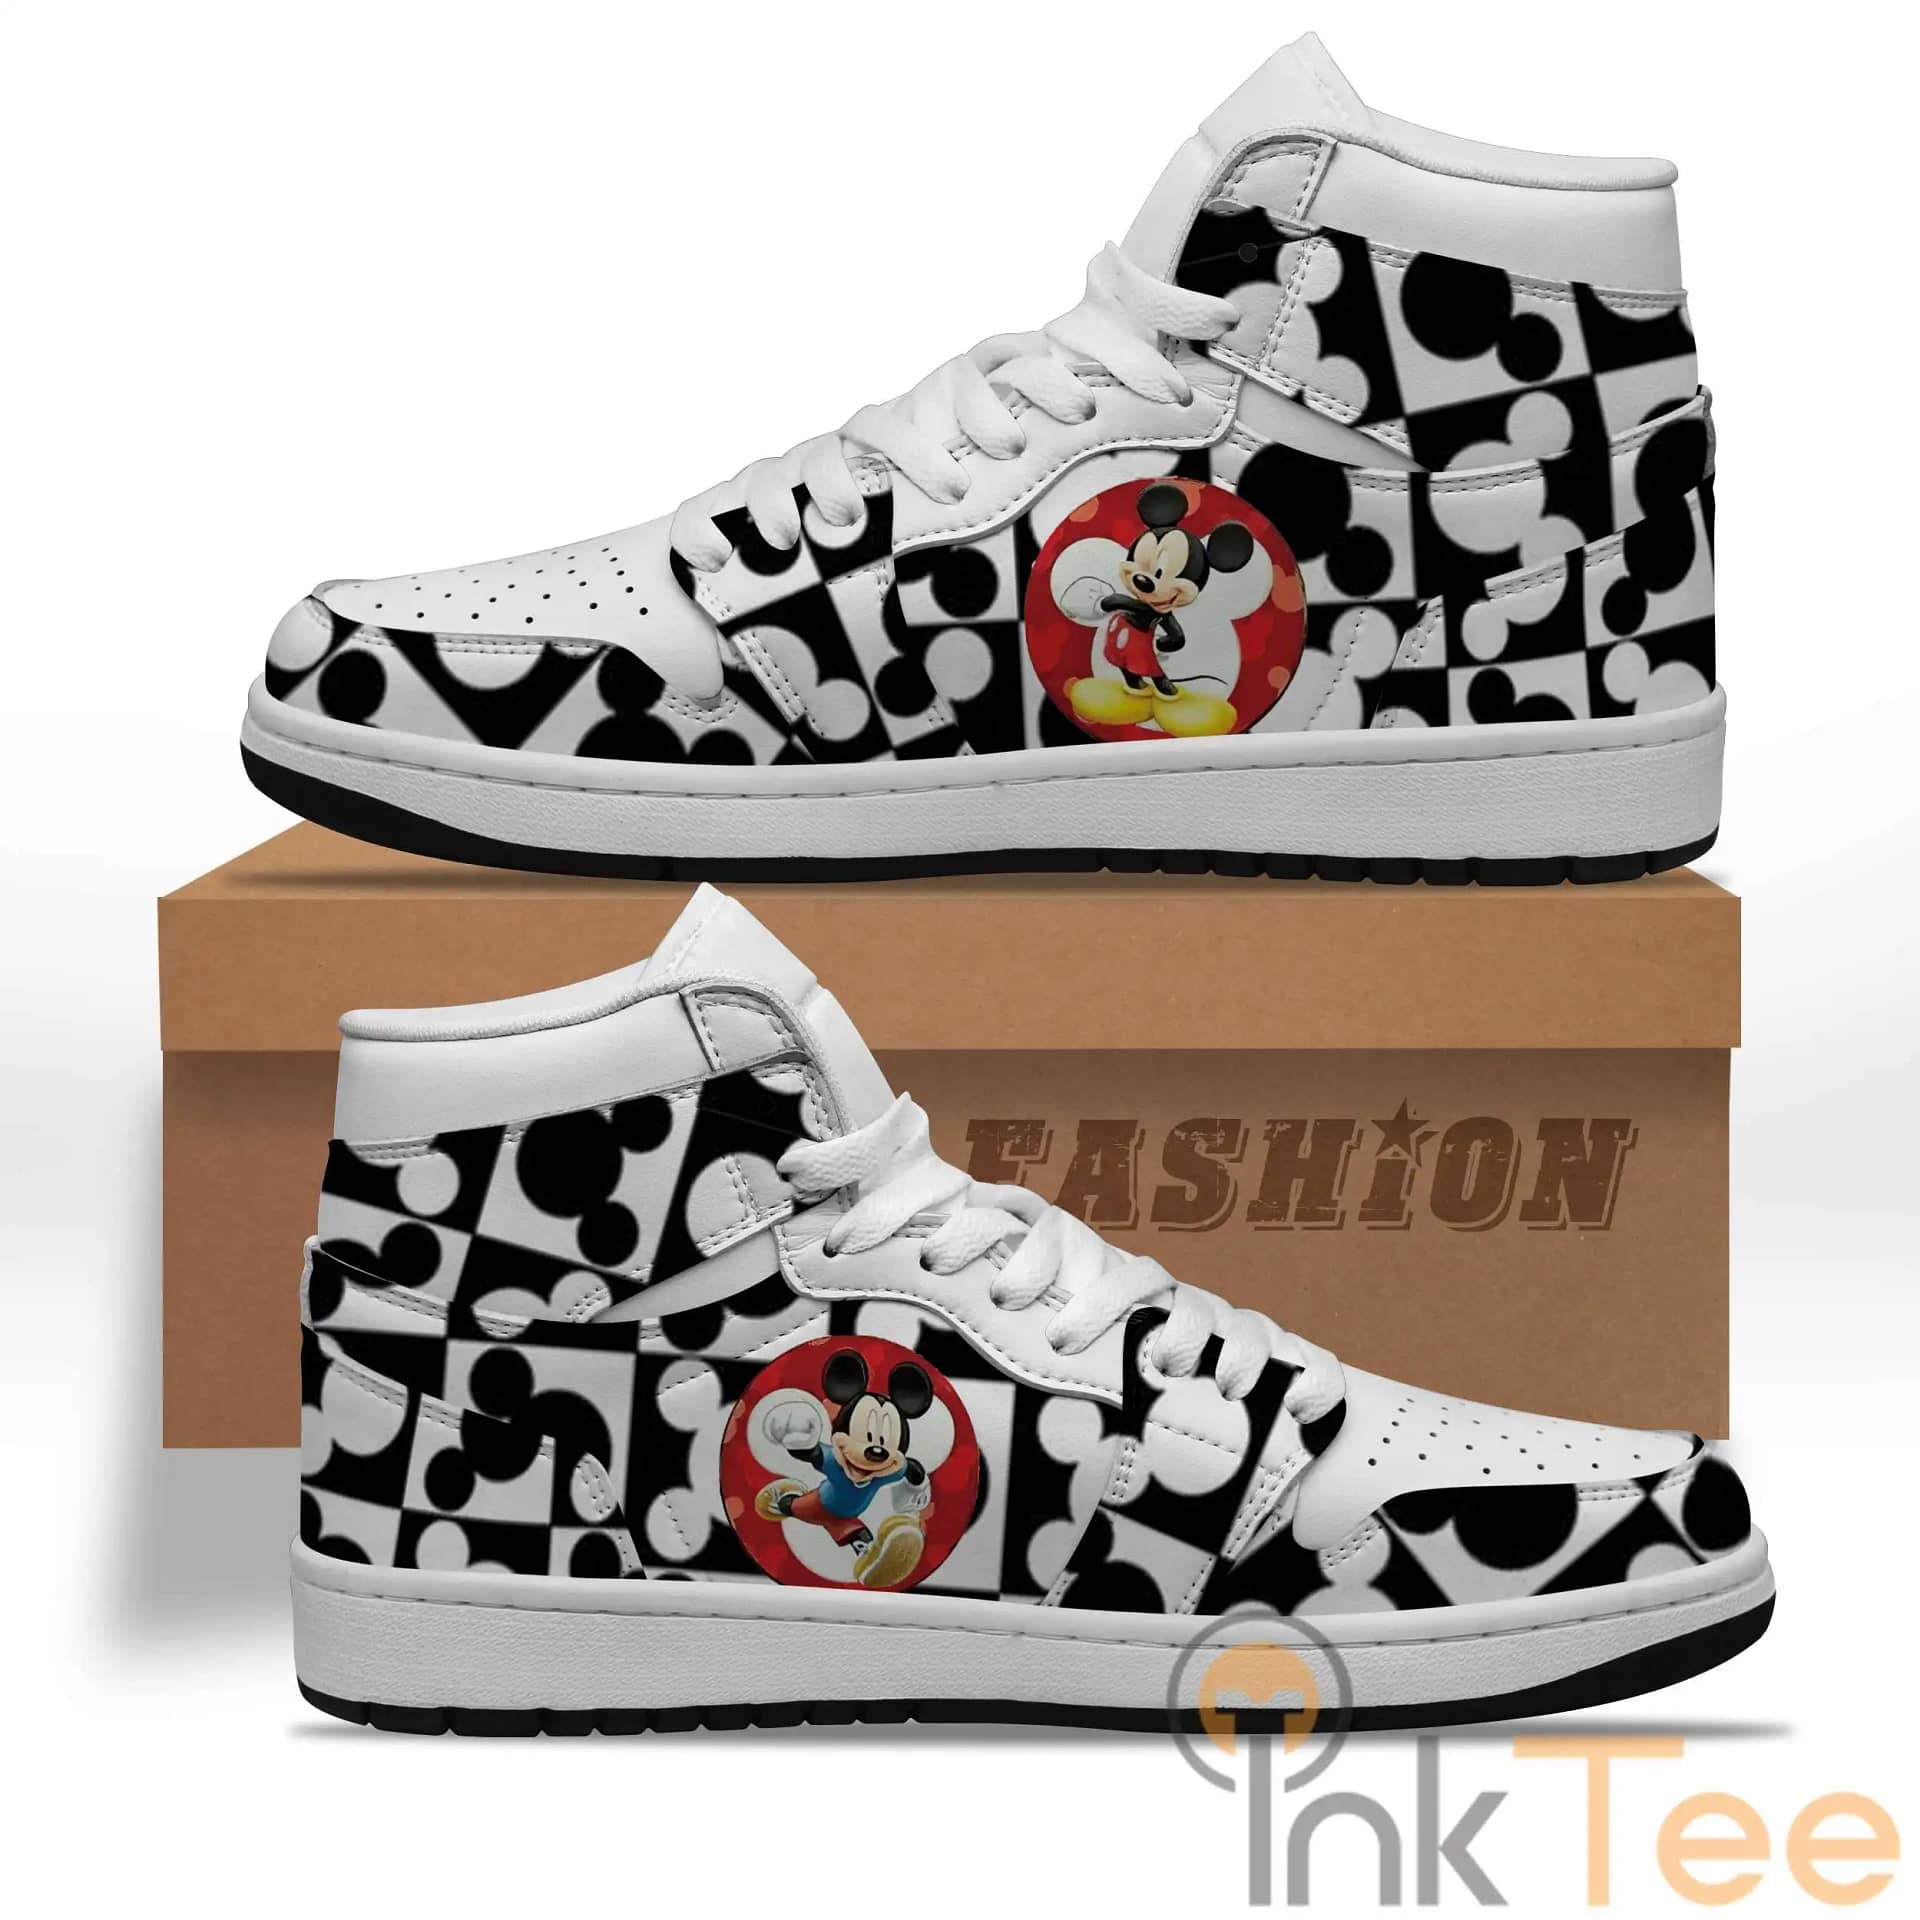 Don’t Stress Over Anything That You Can’t Change Mickey Mouse Custom Air Jordan Shoes